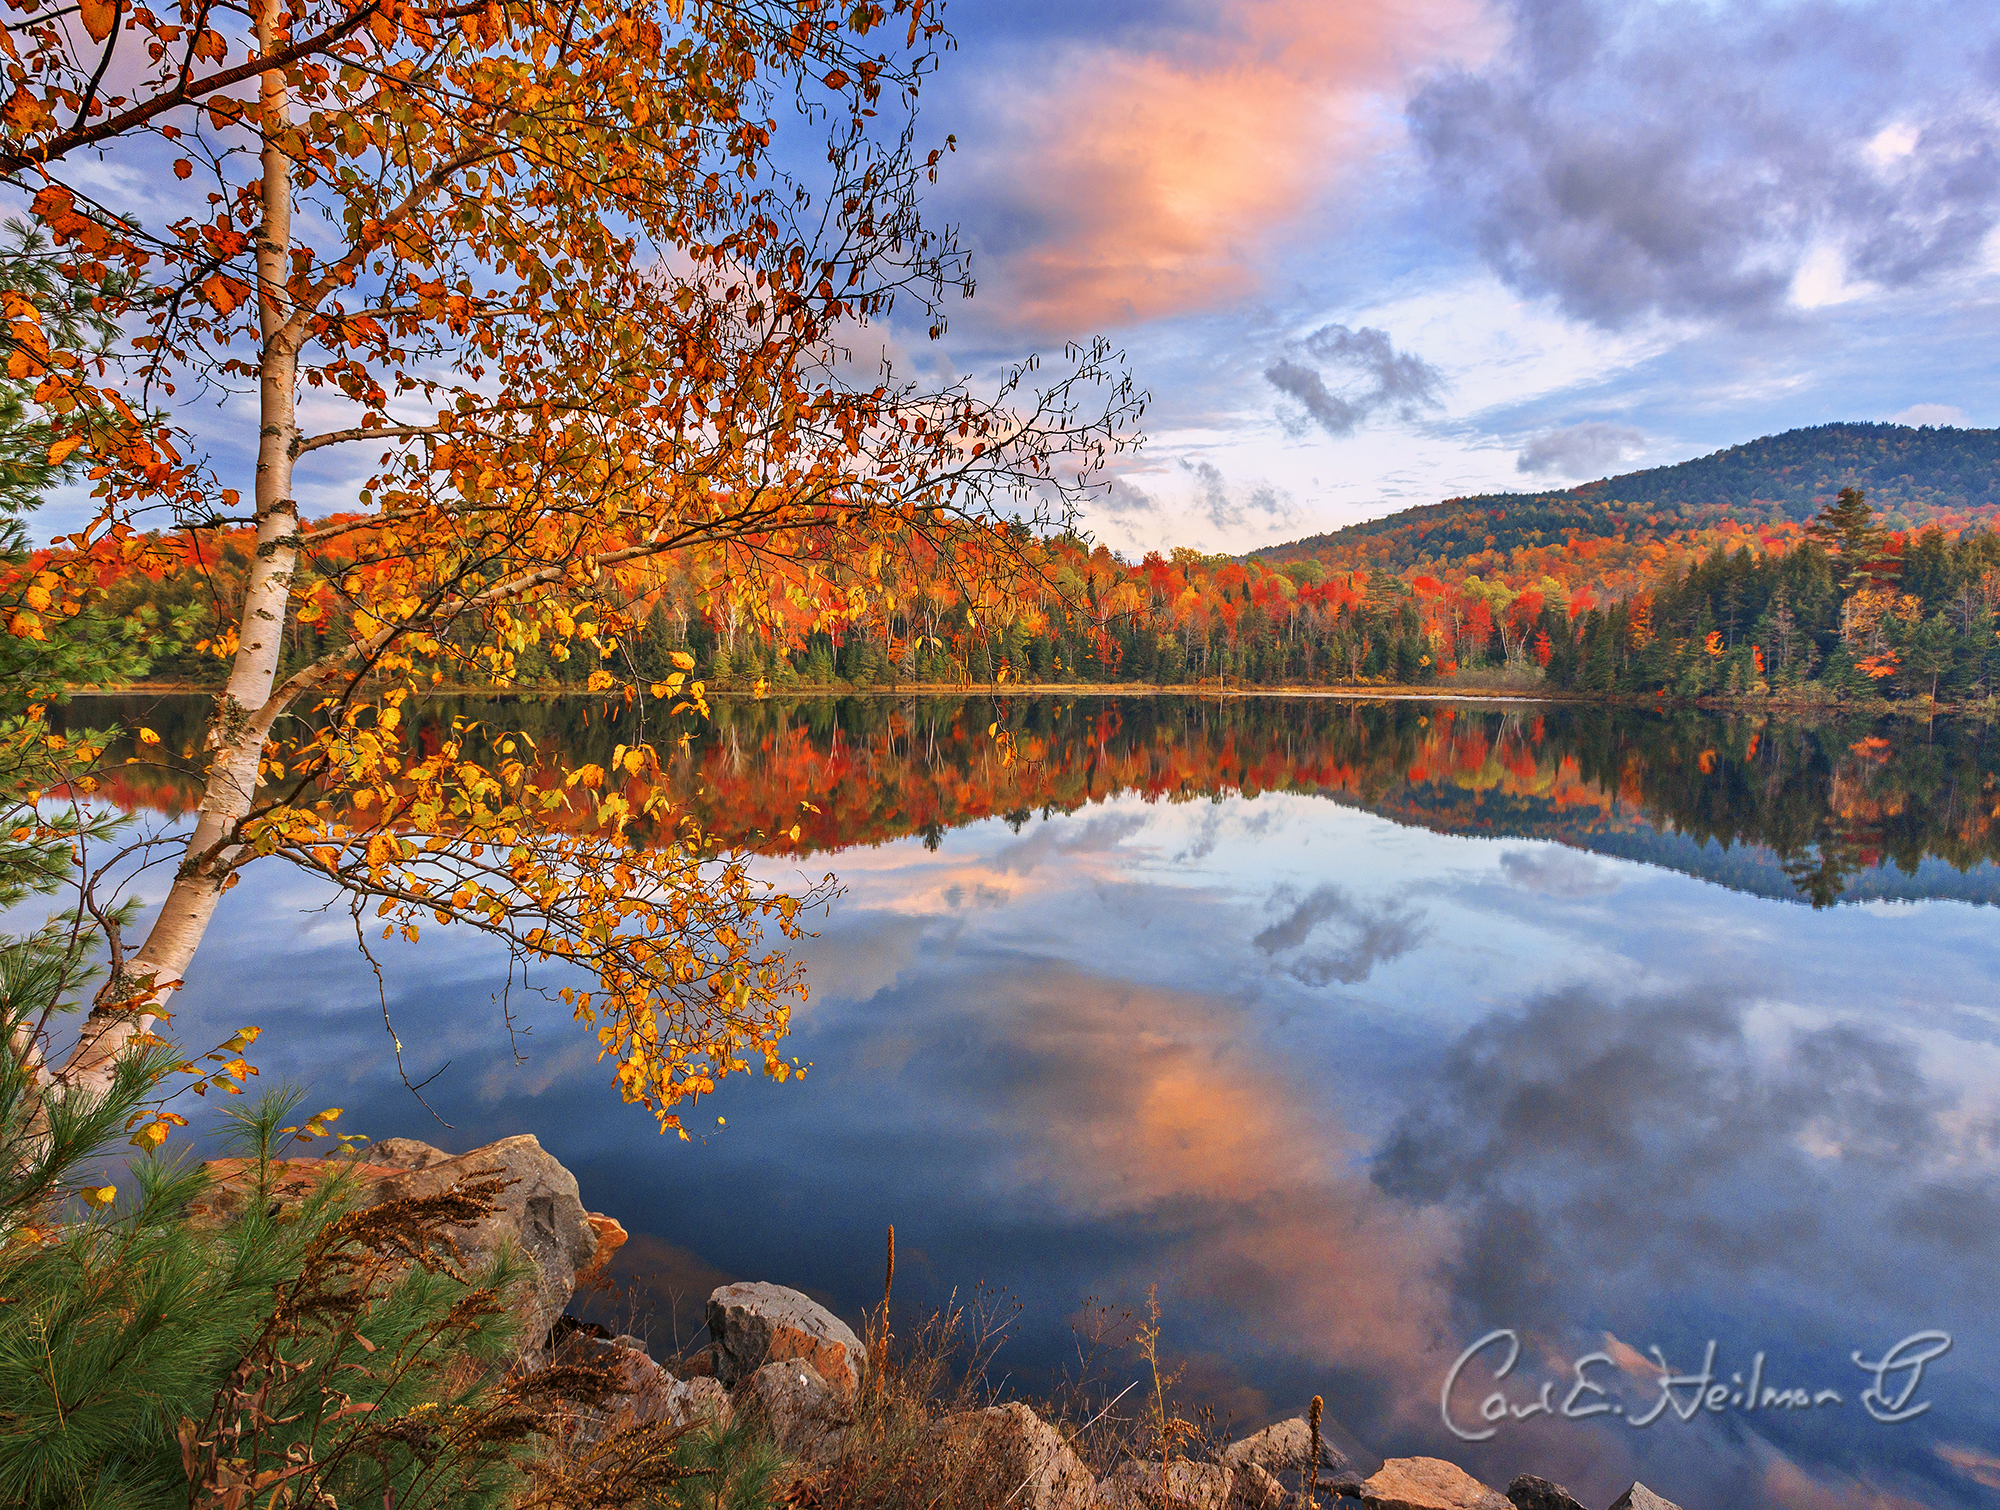 Tips for Seeing Fall Foliage in the Adirondacks